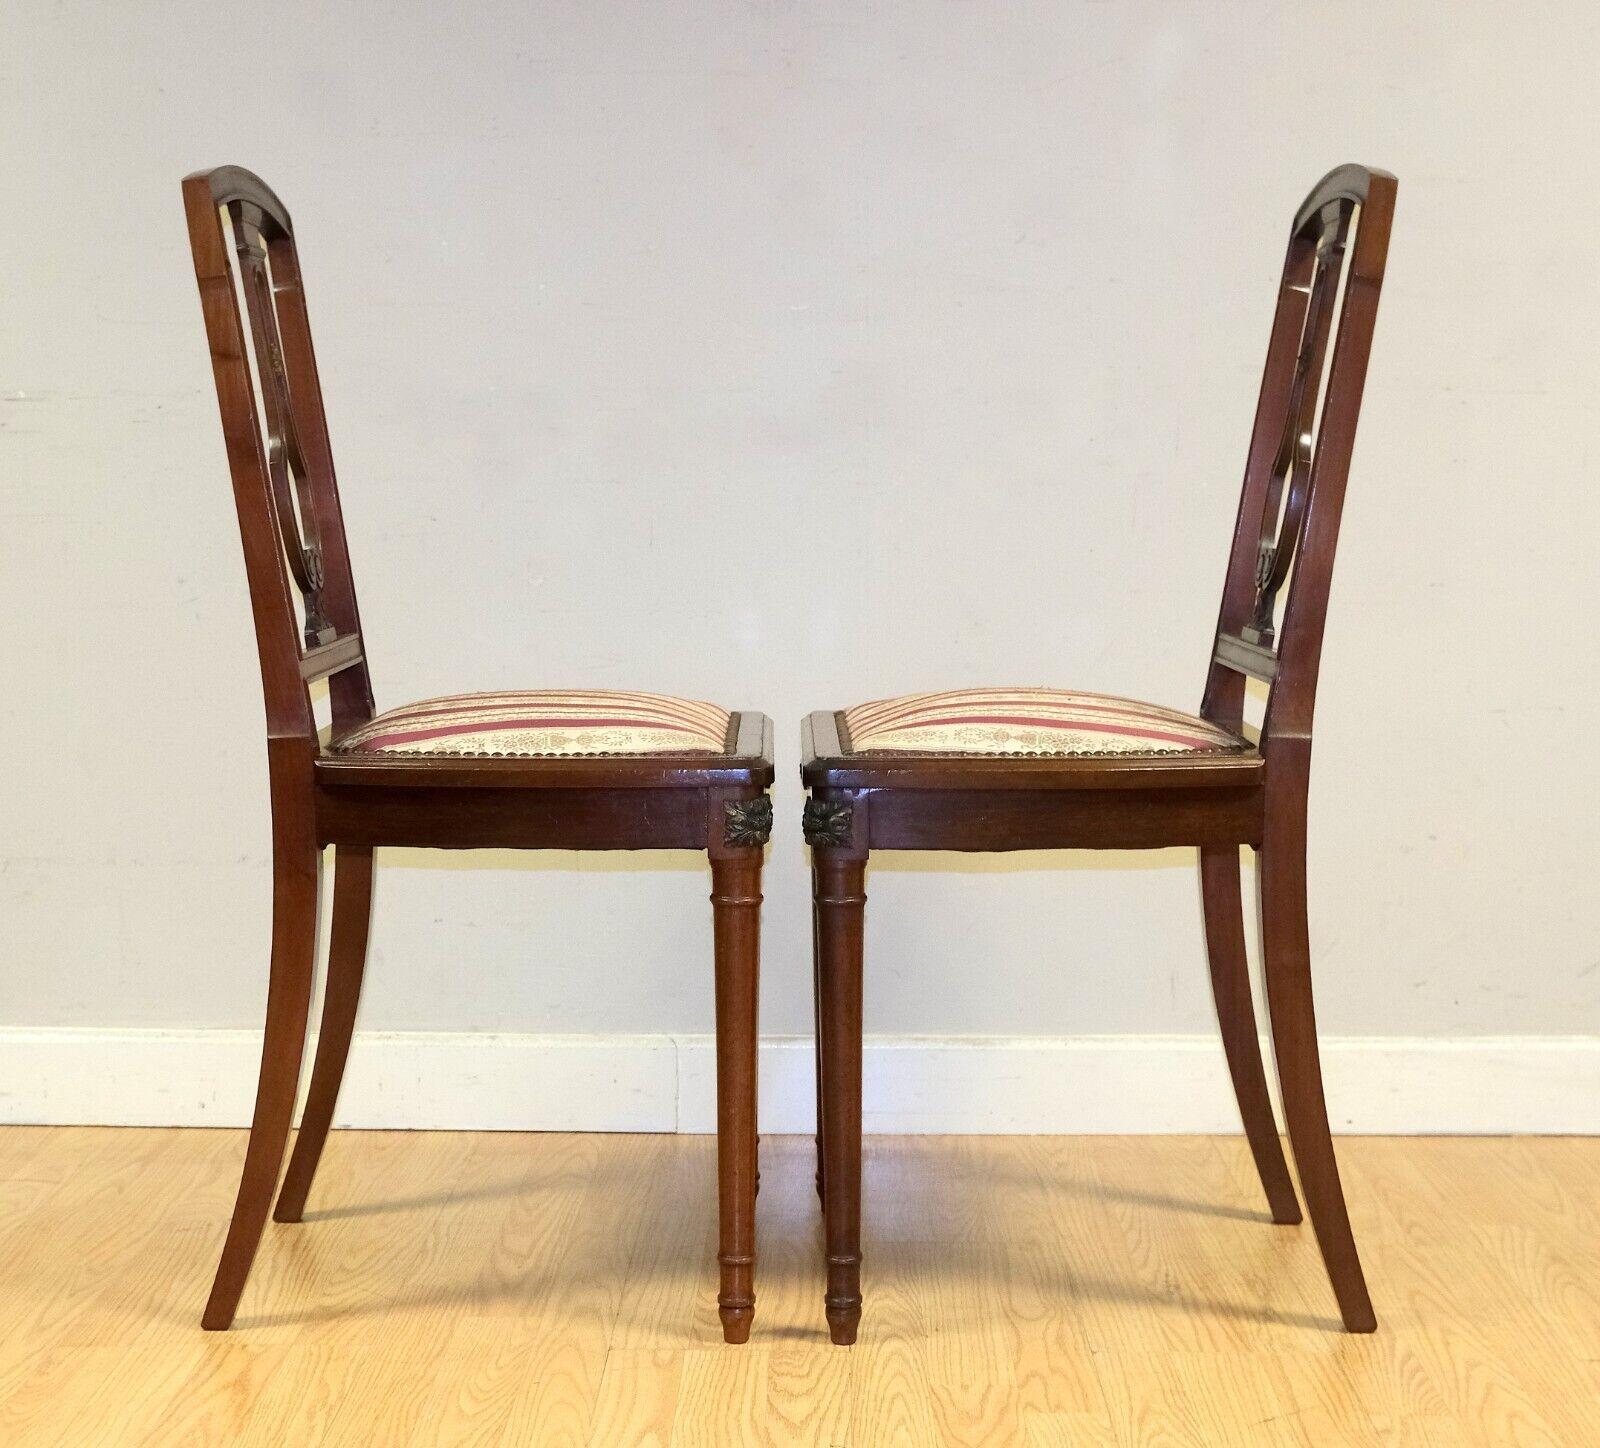 Regency CHARMING PAIR OF OCCASIONAL HARDWOOD CHAIR WiTH STIPE FABRIC SEAT & STUDS For Sale